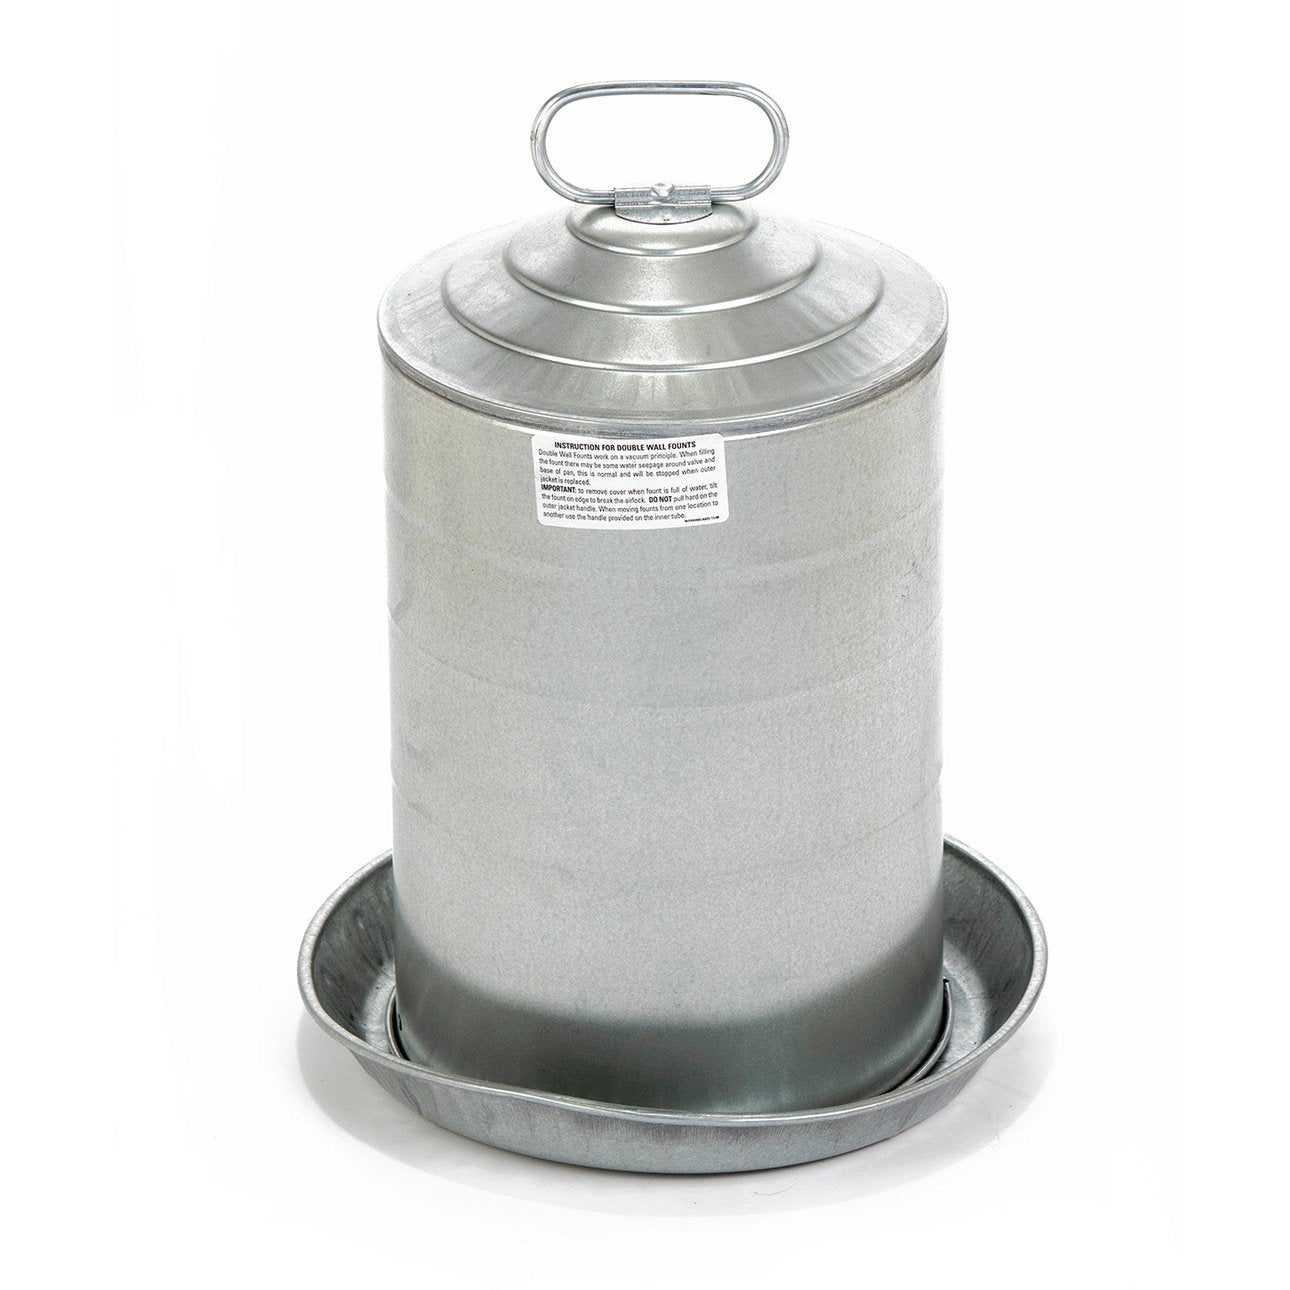 Little Giant - Galvanized Steel Poultry Drinker, 3 Gallons